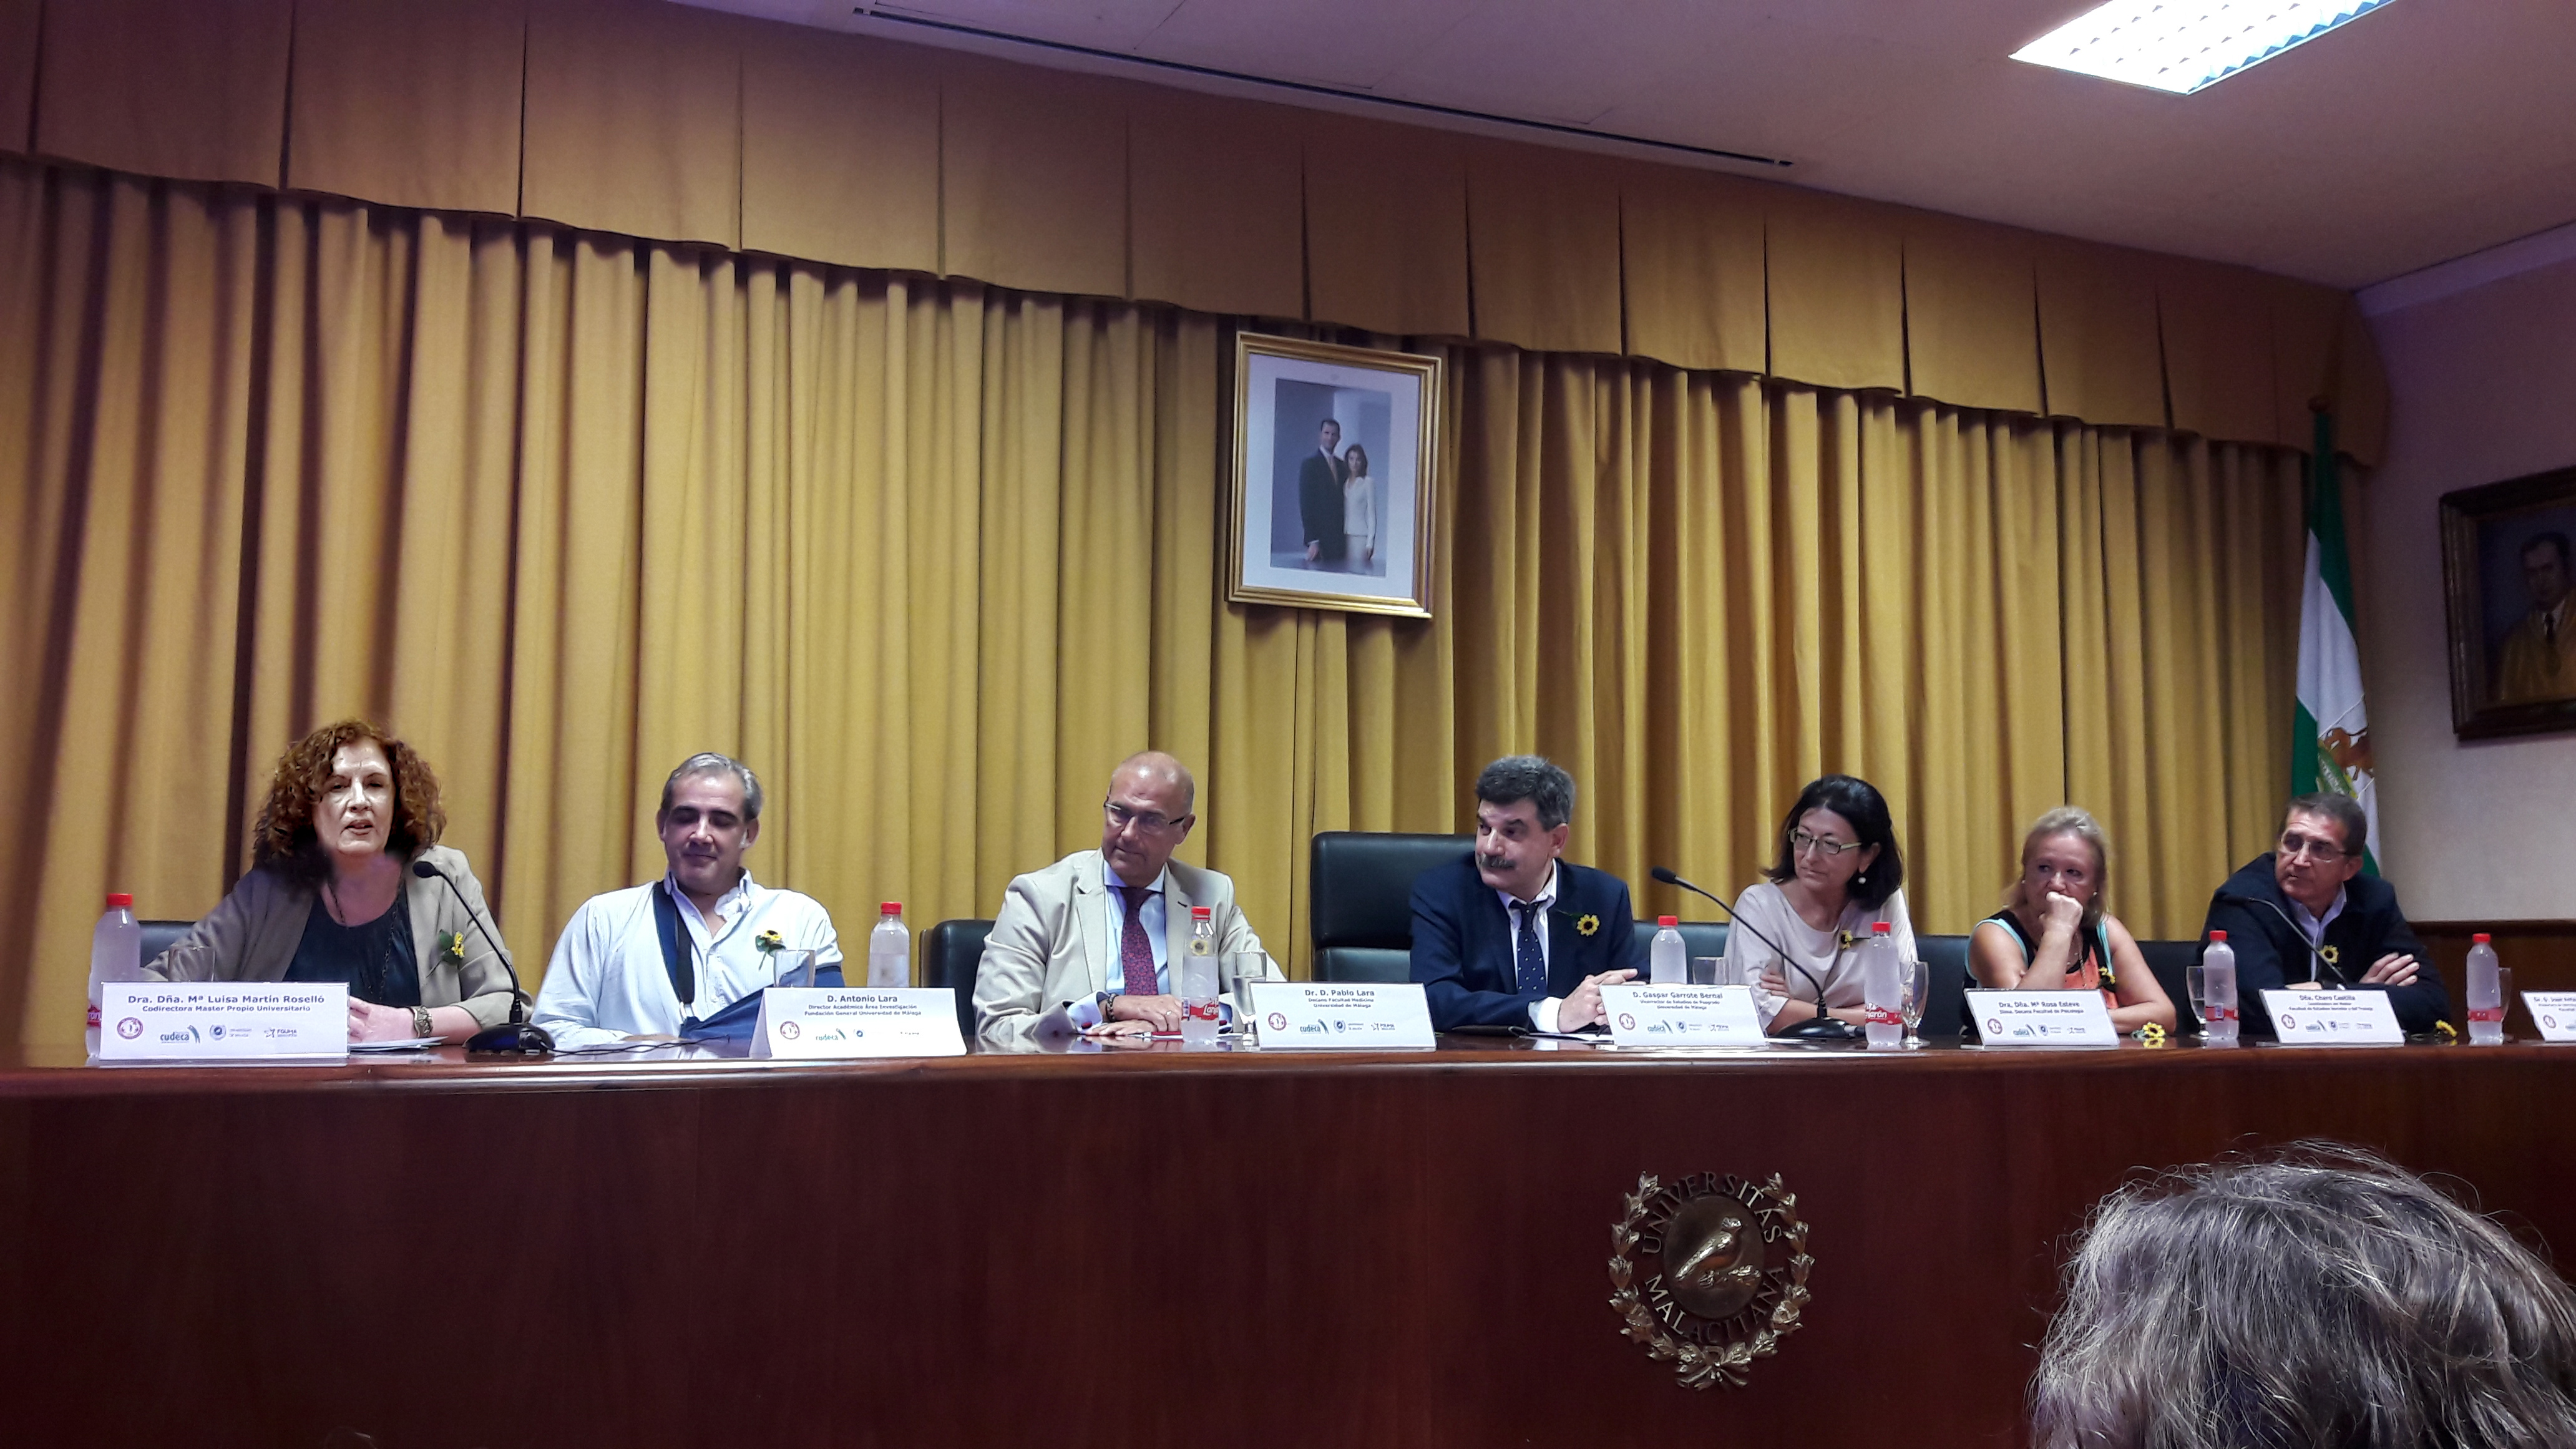 Master’s Degree in Palliative Care of the University of Malaga and CUDECA Inaugurated